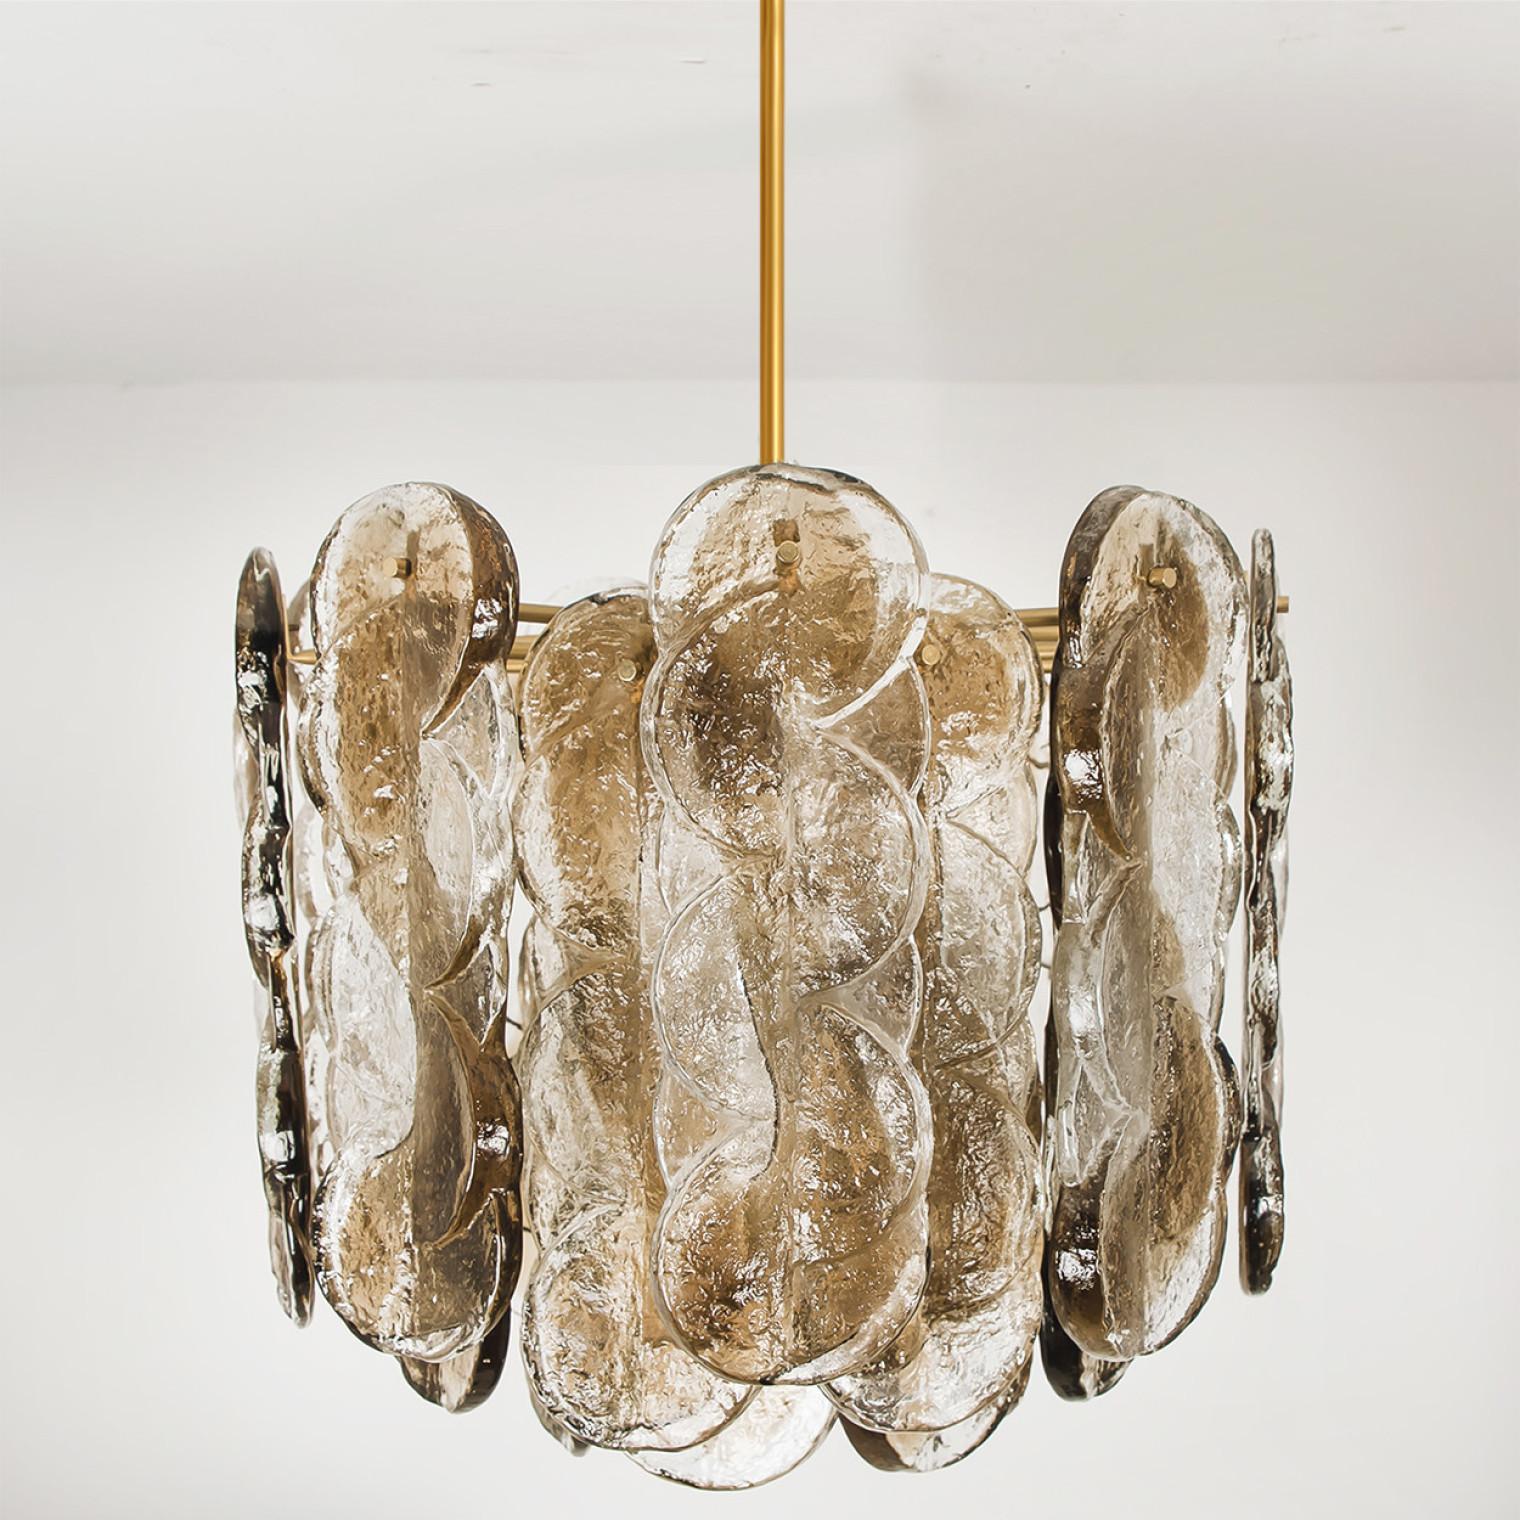 high quality murano glass chandelier by Kalmar, 1960s smoked swirl ice glass, clear twisted crystal glass panels with a light gold dish amber colored stripe in it.

Kalmar was the most important producer of premium-quality chandeliers in Austria